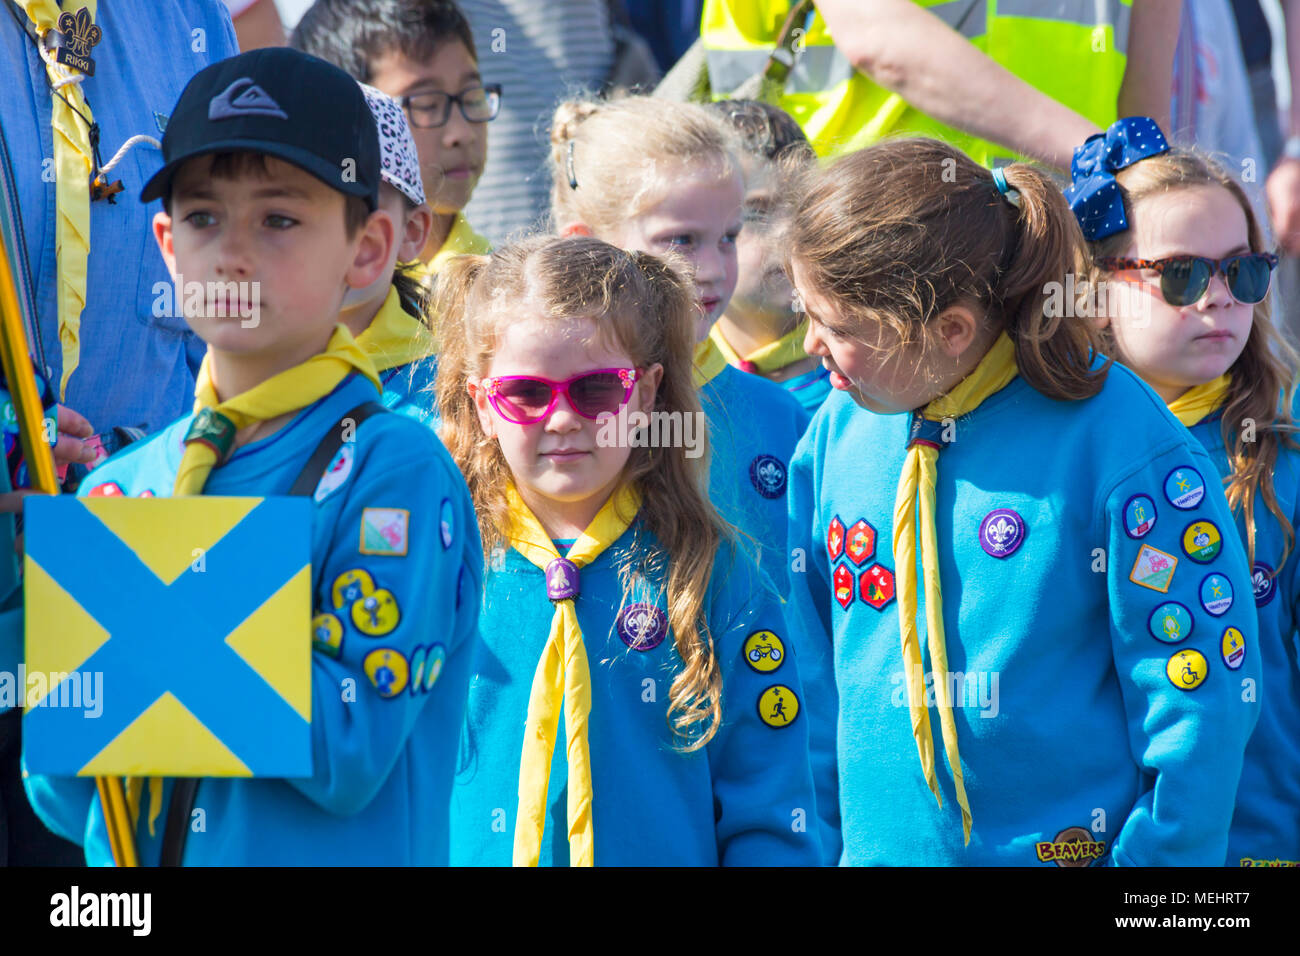 Bournemouth, Dorset, UK 22nd April 2018. Warm sunny weather as hundreds turn out to support the St George's Day scouts parade in Bournemouth. Youngsters boys and girls scouts cubs beavers celebrate Saint Georges day taking part in the procession. Credit: Carolyn Jenkins/Alamy Live News Stock Photo